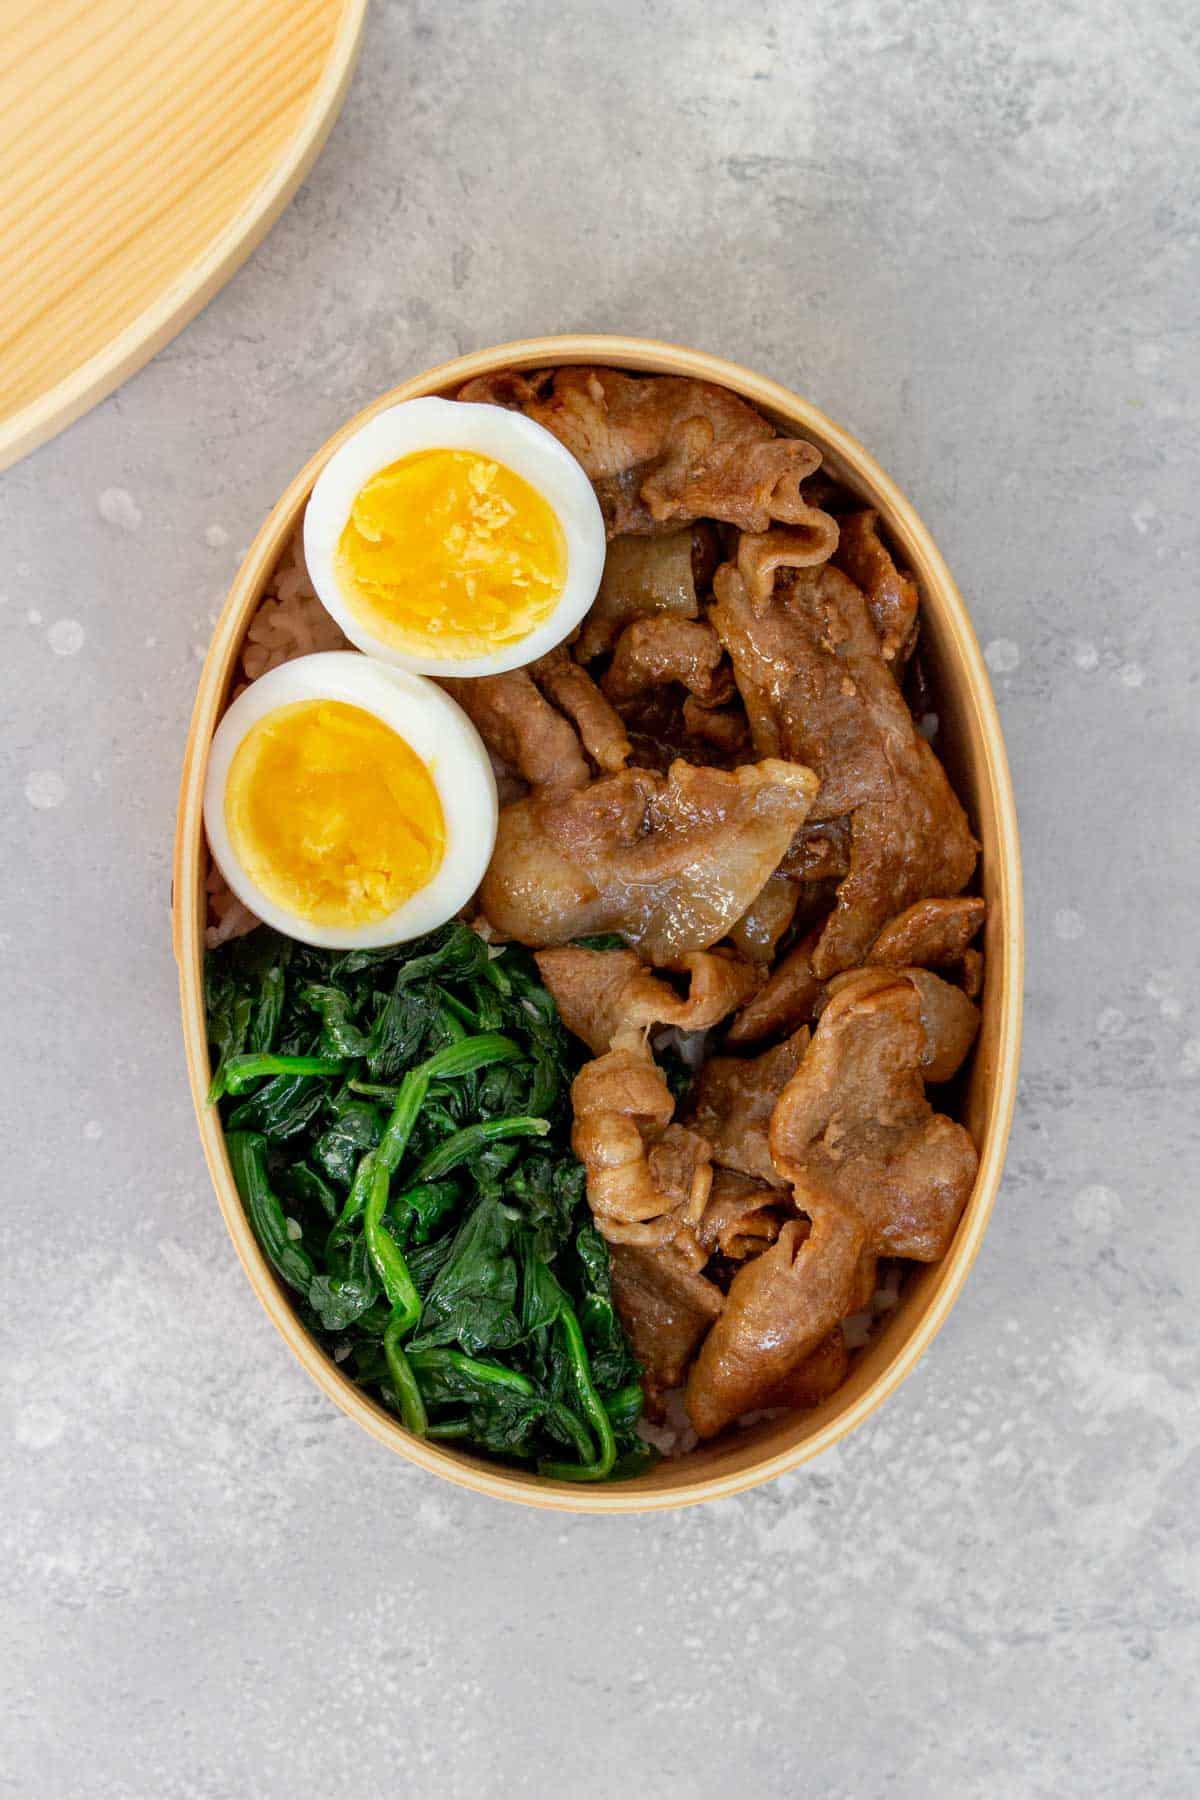 Overhead view of a bento box with cooked sliced pork, spinach, and eggs over rice.